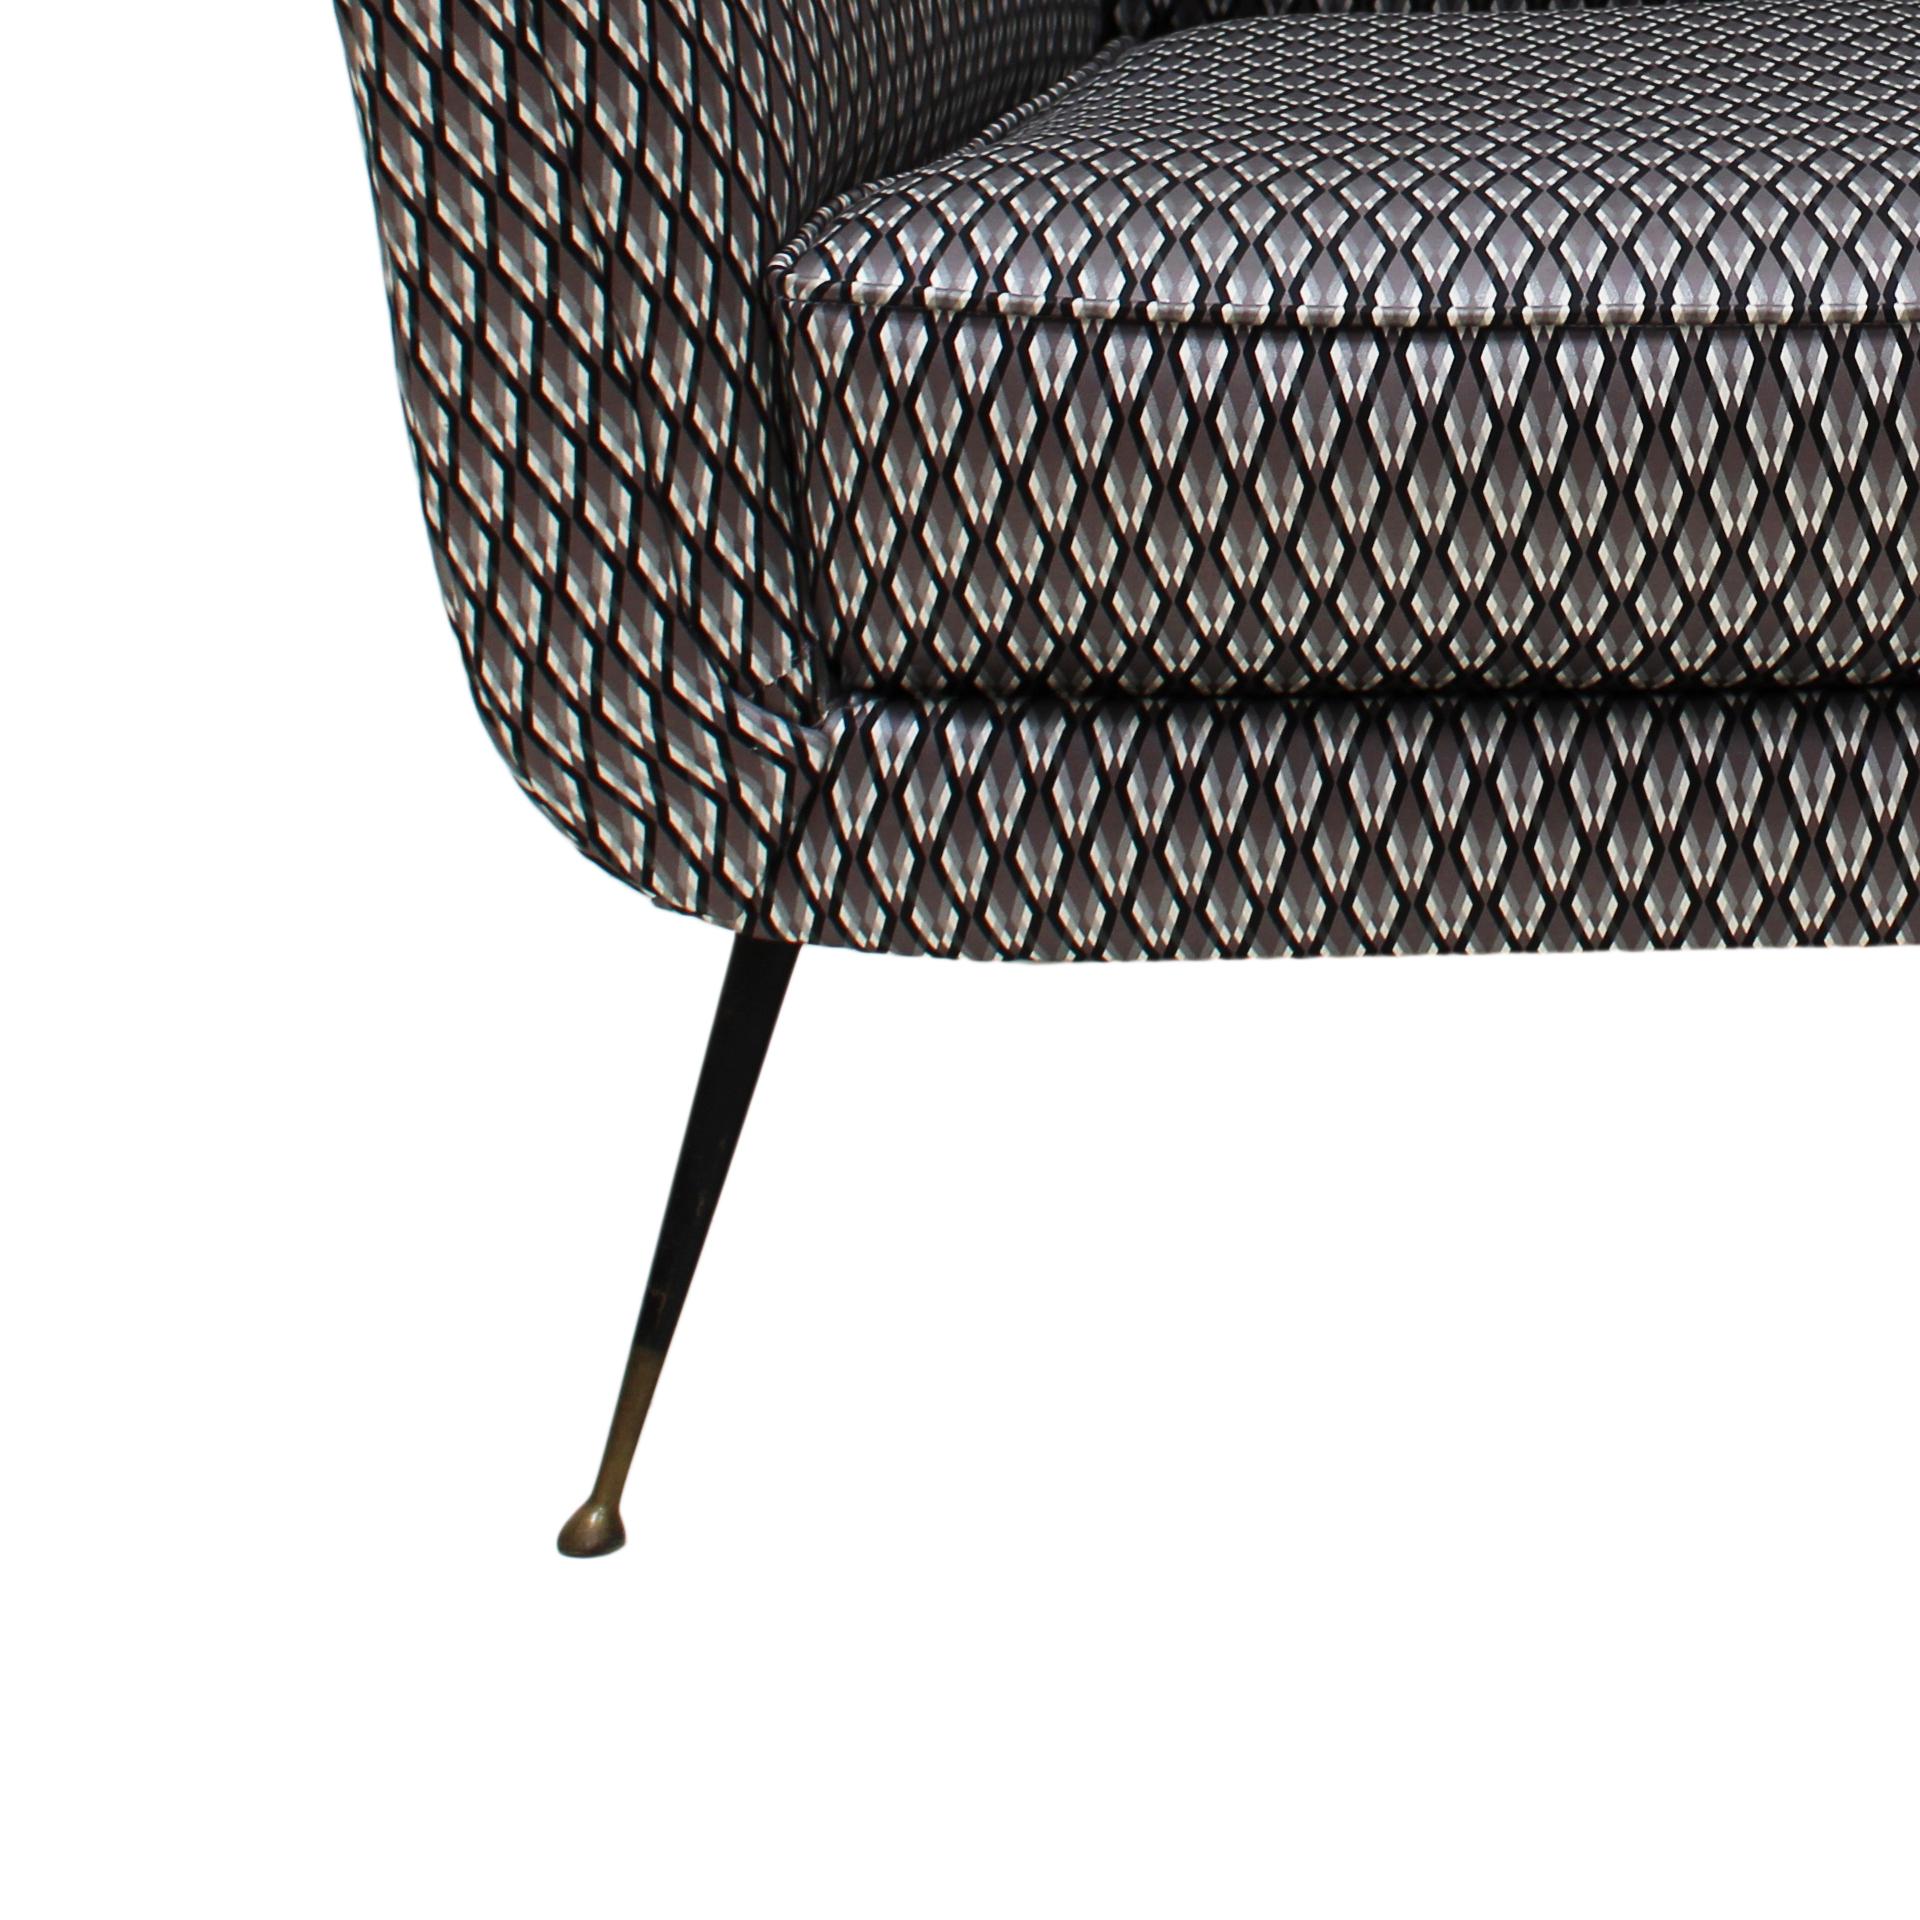 Metal Gigi Radice Mid-Century Armchair Upholstered in Serpentino Fabric For Sale